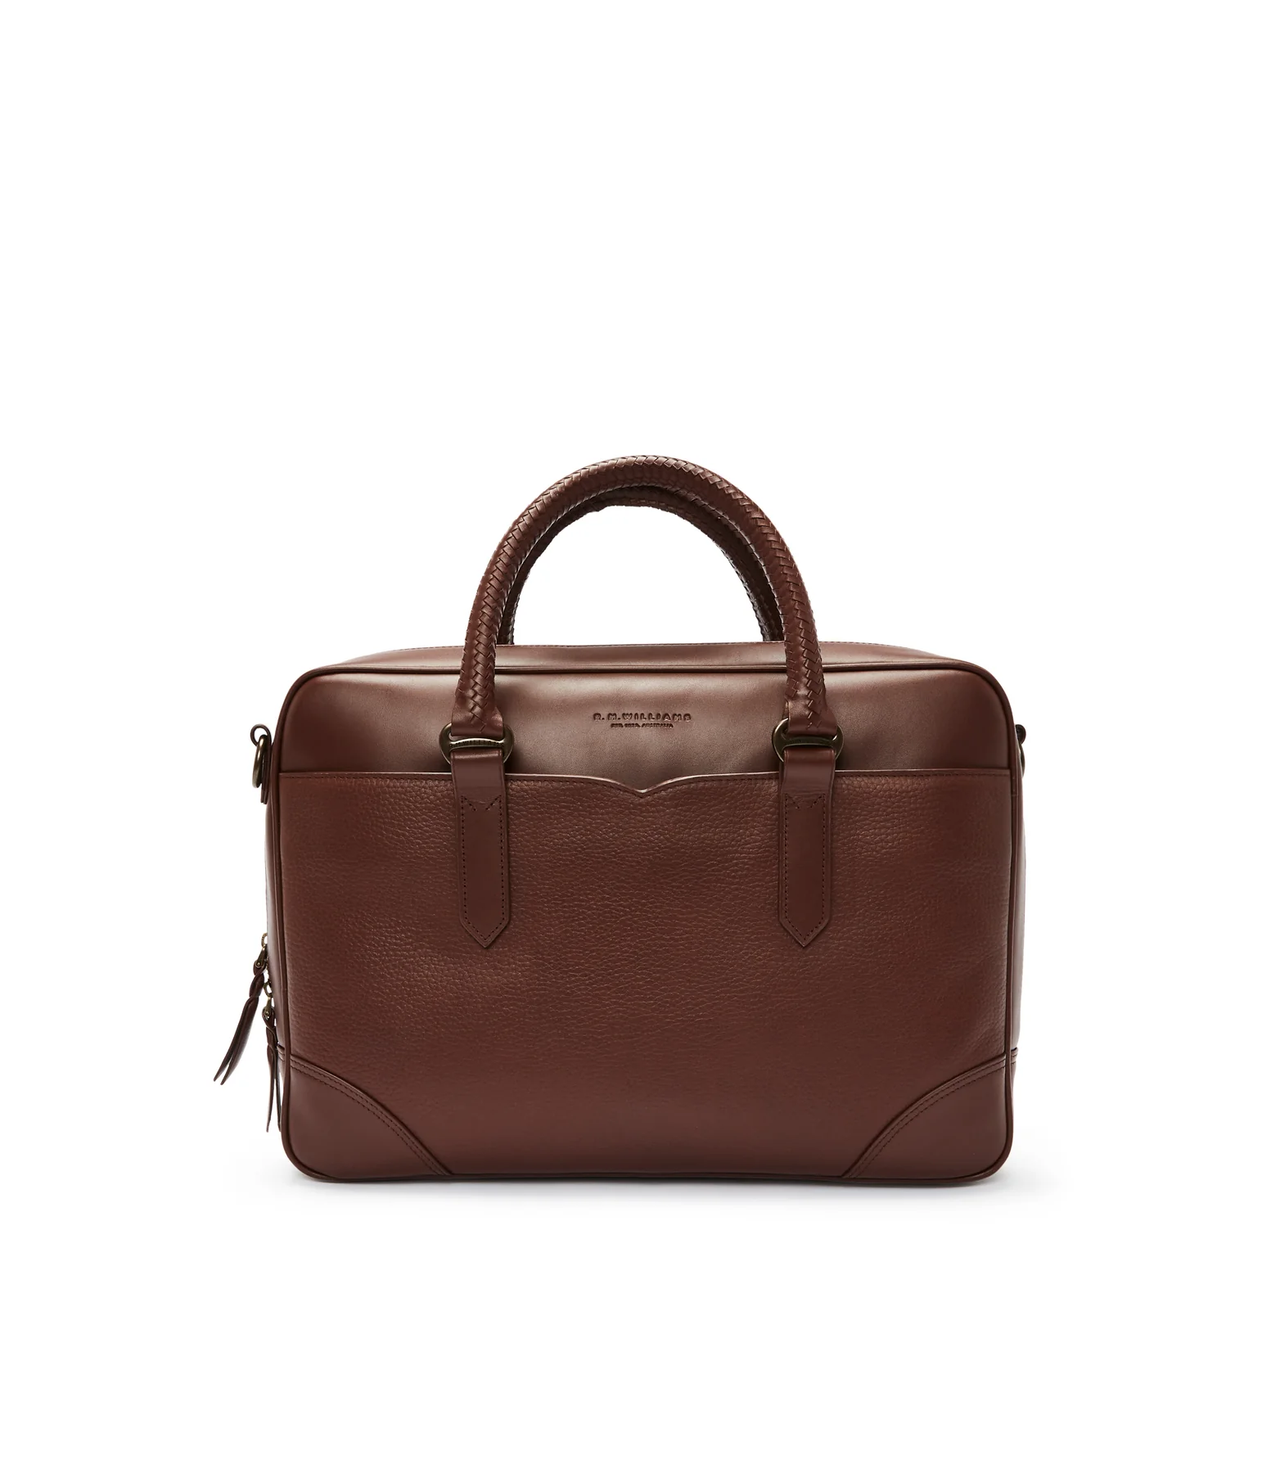 R.M. WILLIAMS Leather Briefcase BROWN